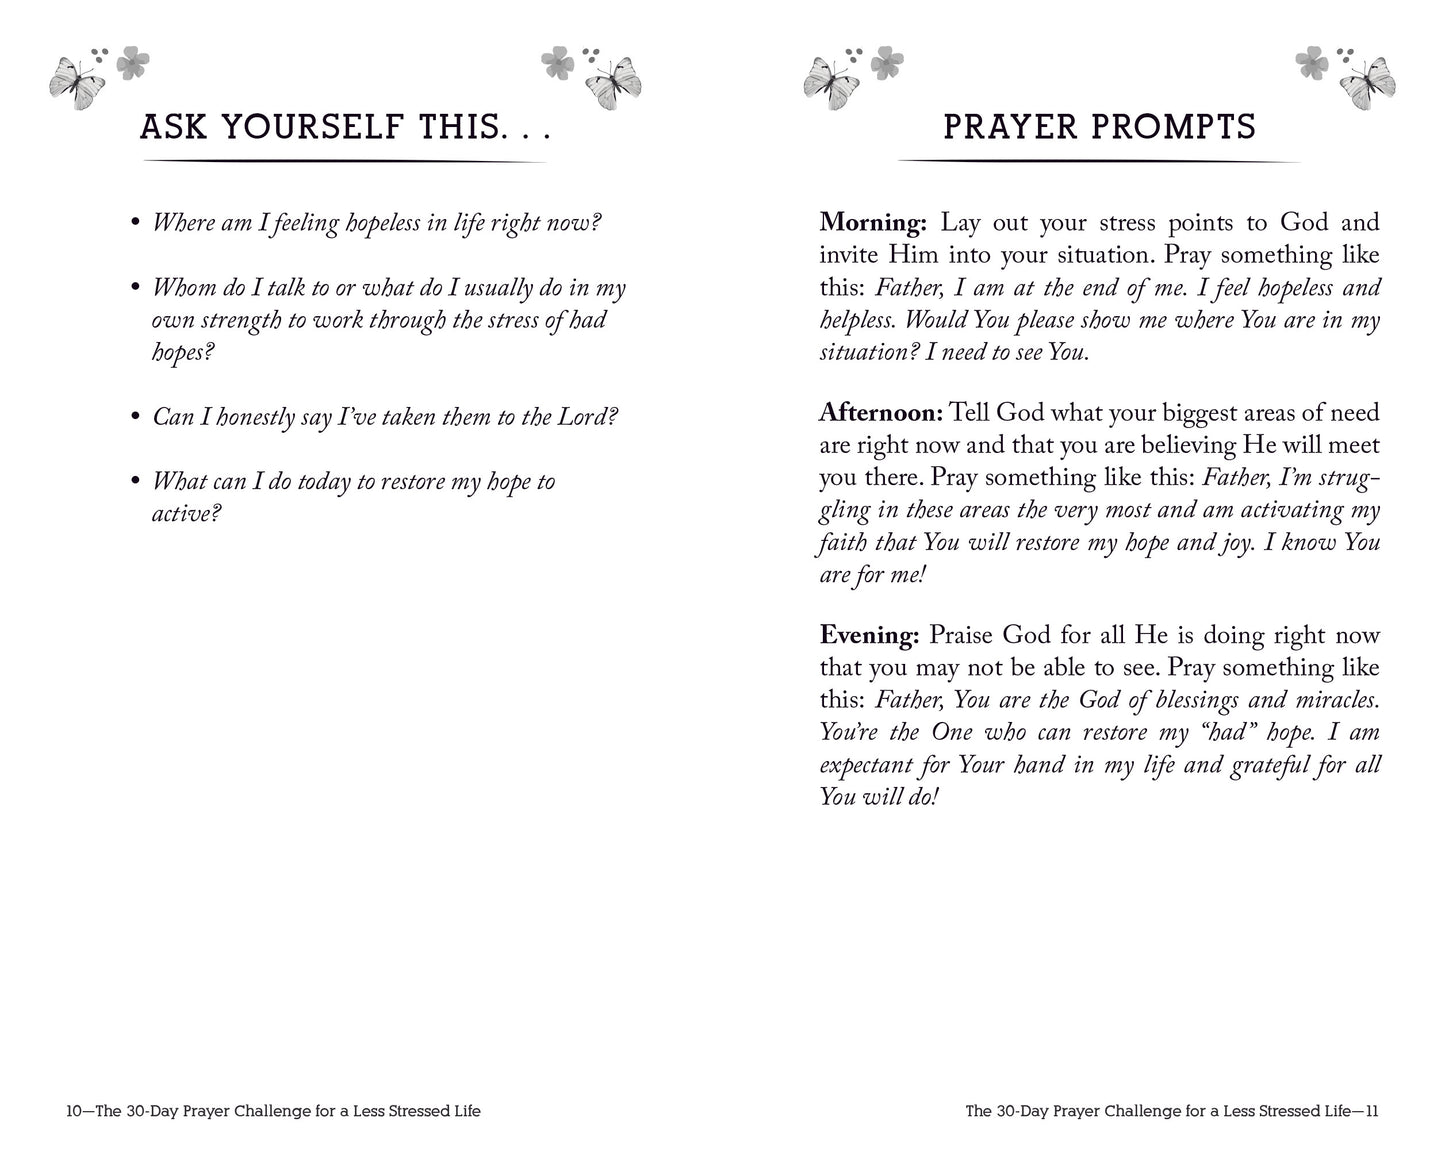 The 30-Day Prayer Challenge for a Less Stressed Life - The Christian Gift Company